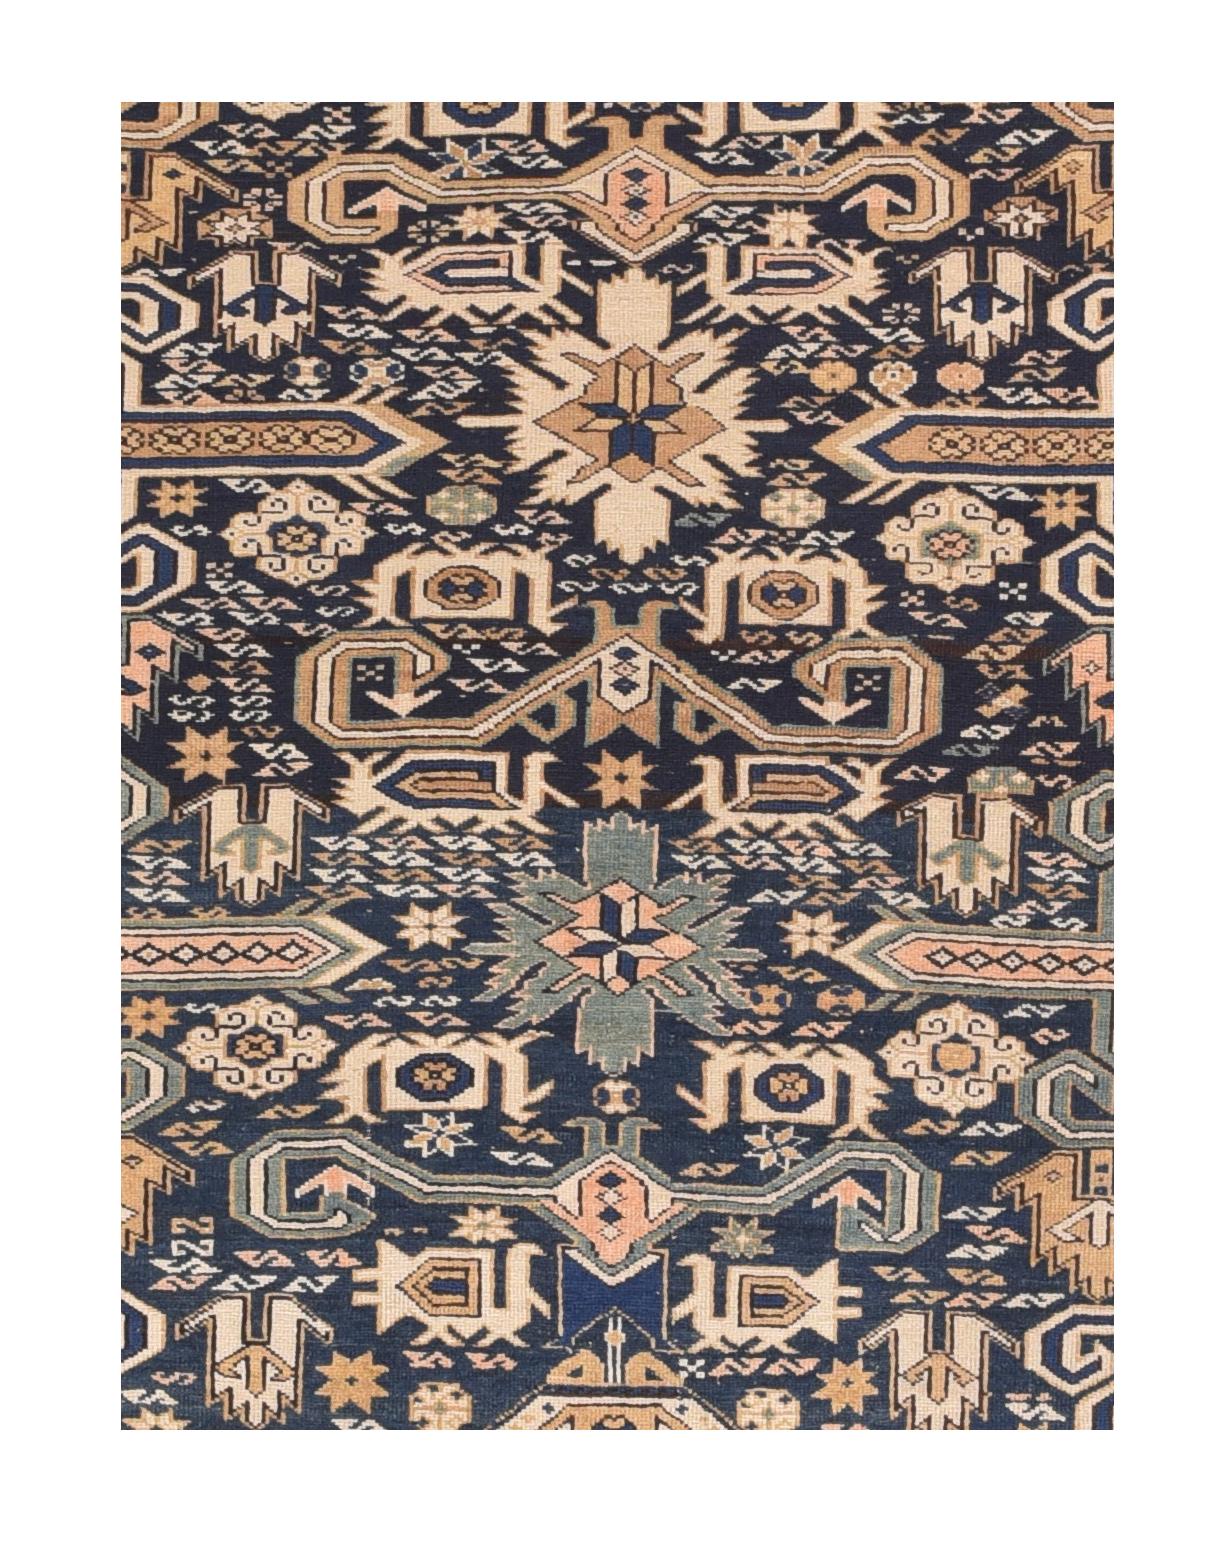 Shirvan rug, floor covering handmade in the Shirvan region of Azerbaijan in the Southeastern Caucasus. With the exception of a group of rugs woven in the vicinity of Baku, most Shirvans are found in small sizes, with examples from the southern part